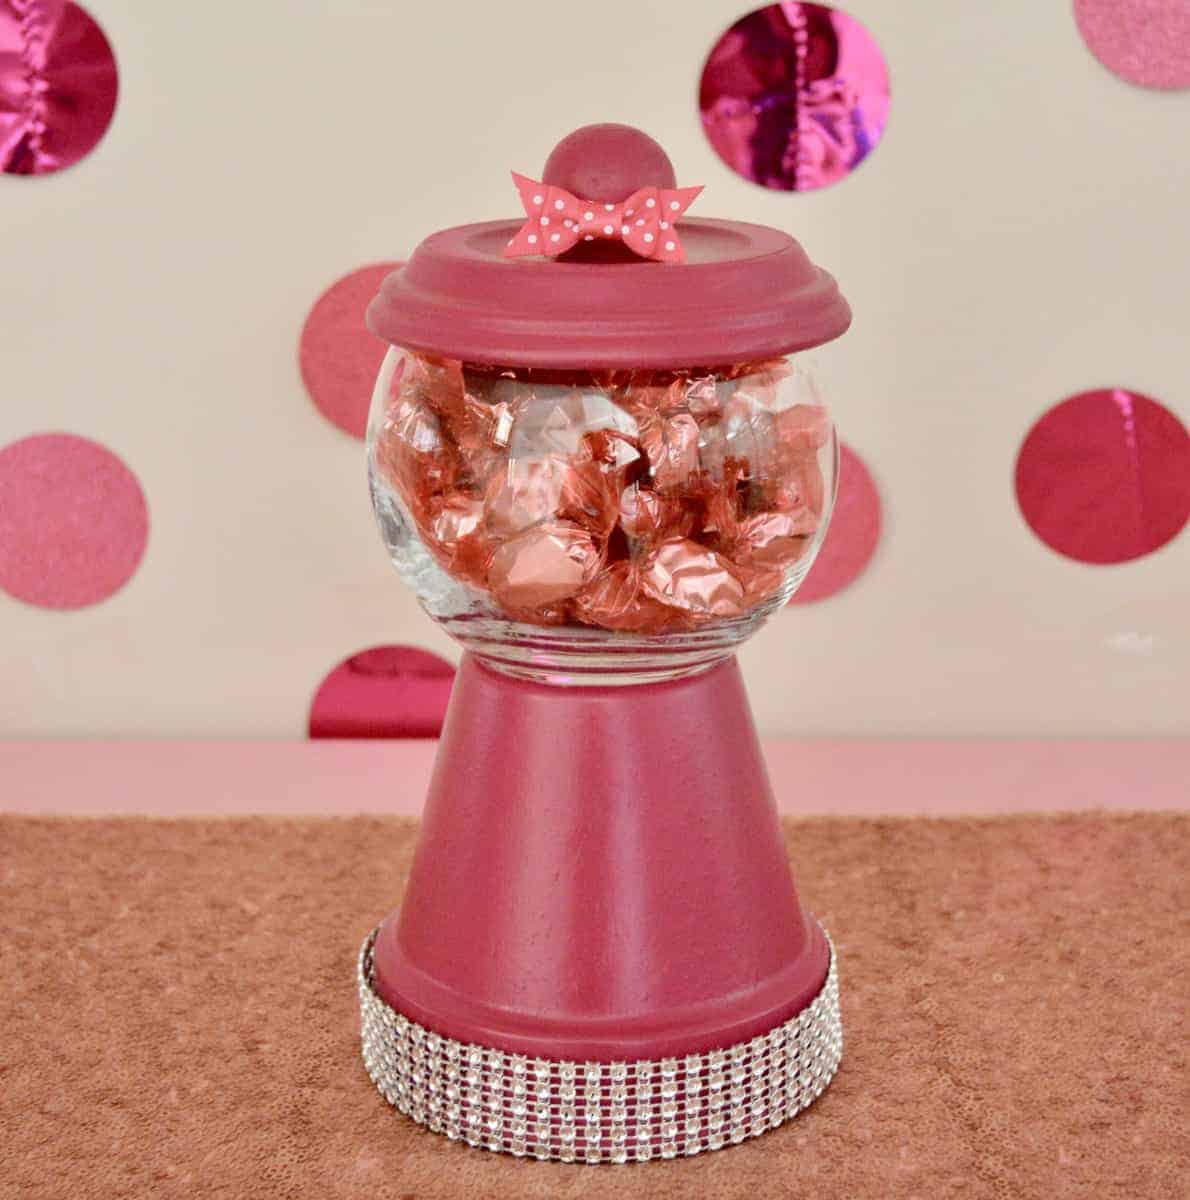 DIY Gumball Machine made with spray paint and terra cotta pots 